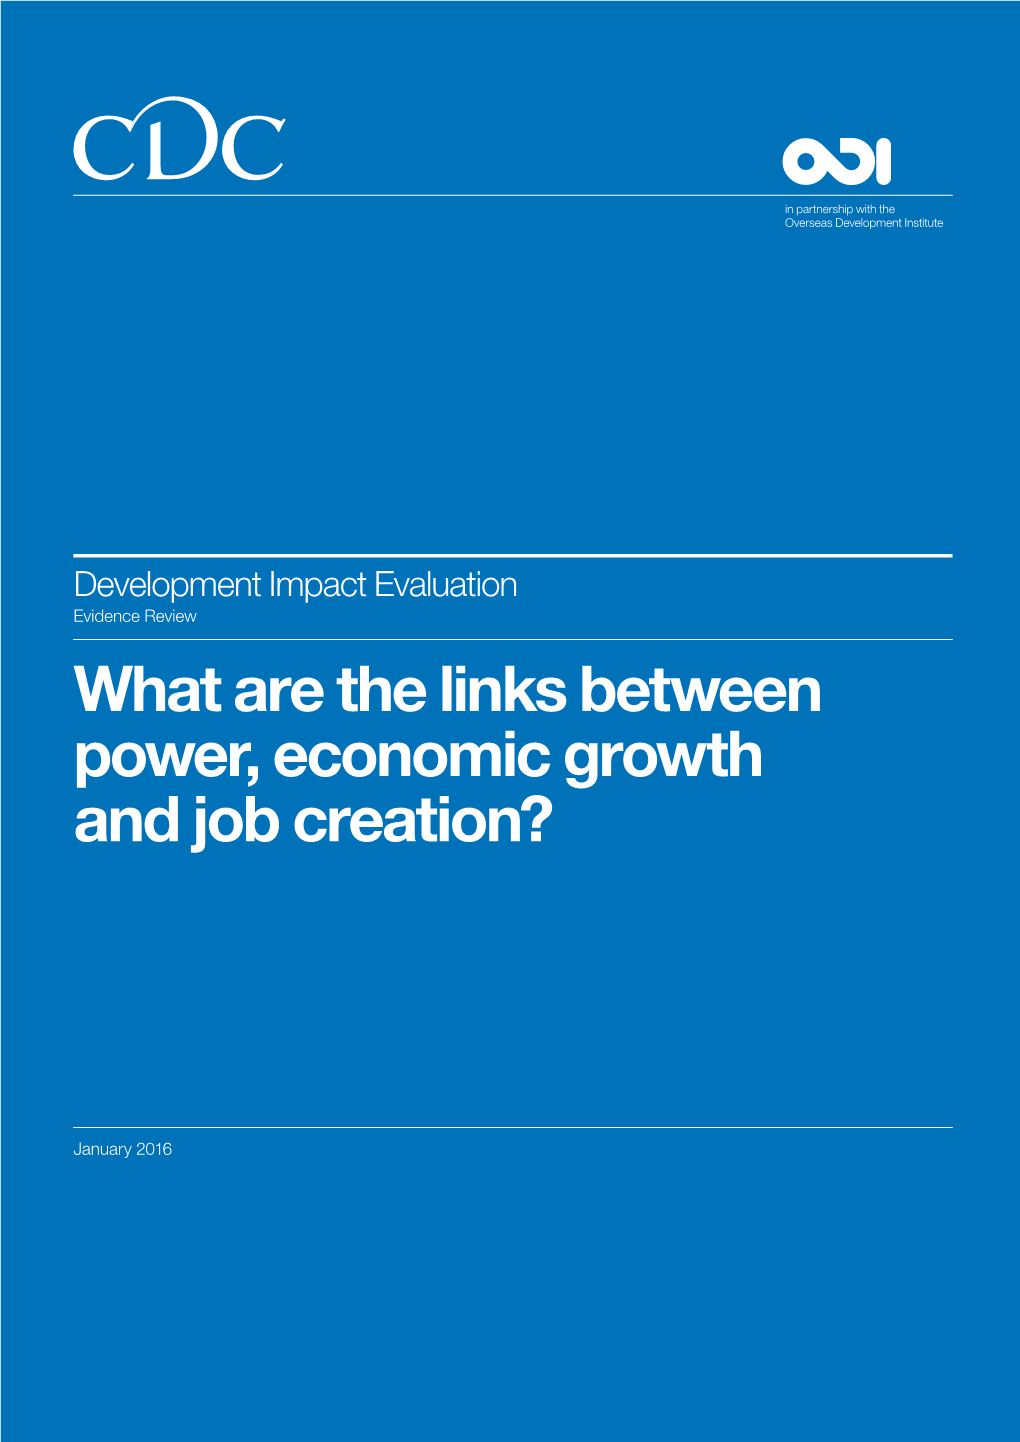 What Are the Links Between Power, Economic Growth and Job Creation?